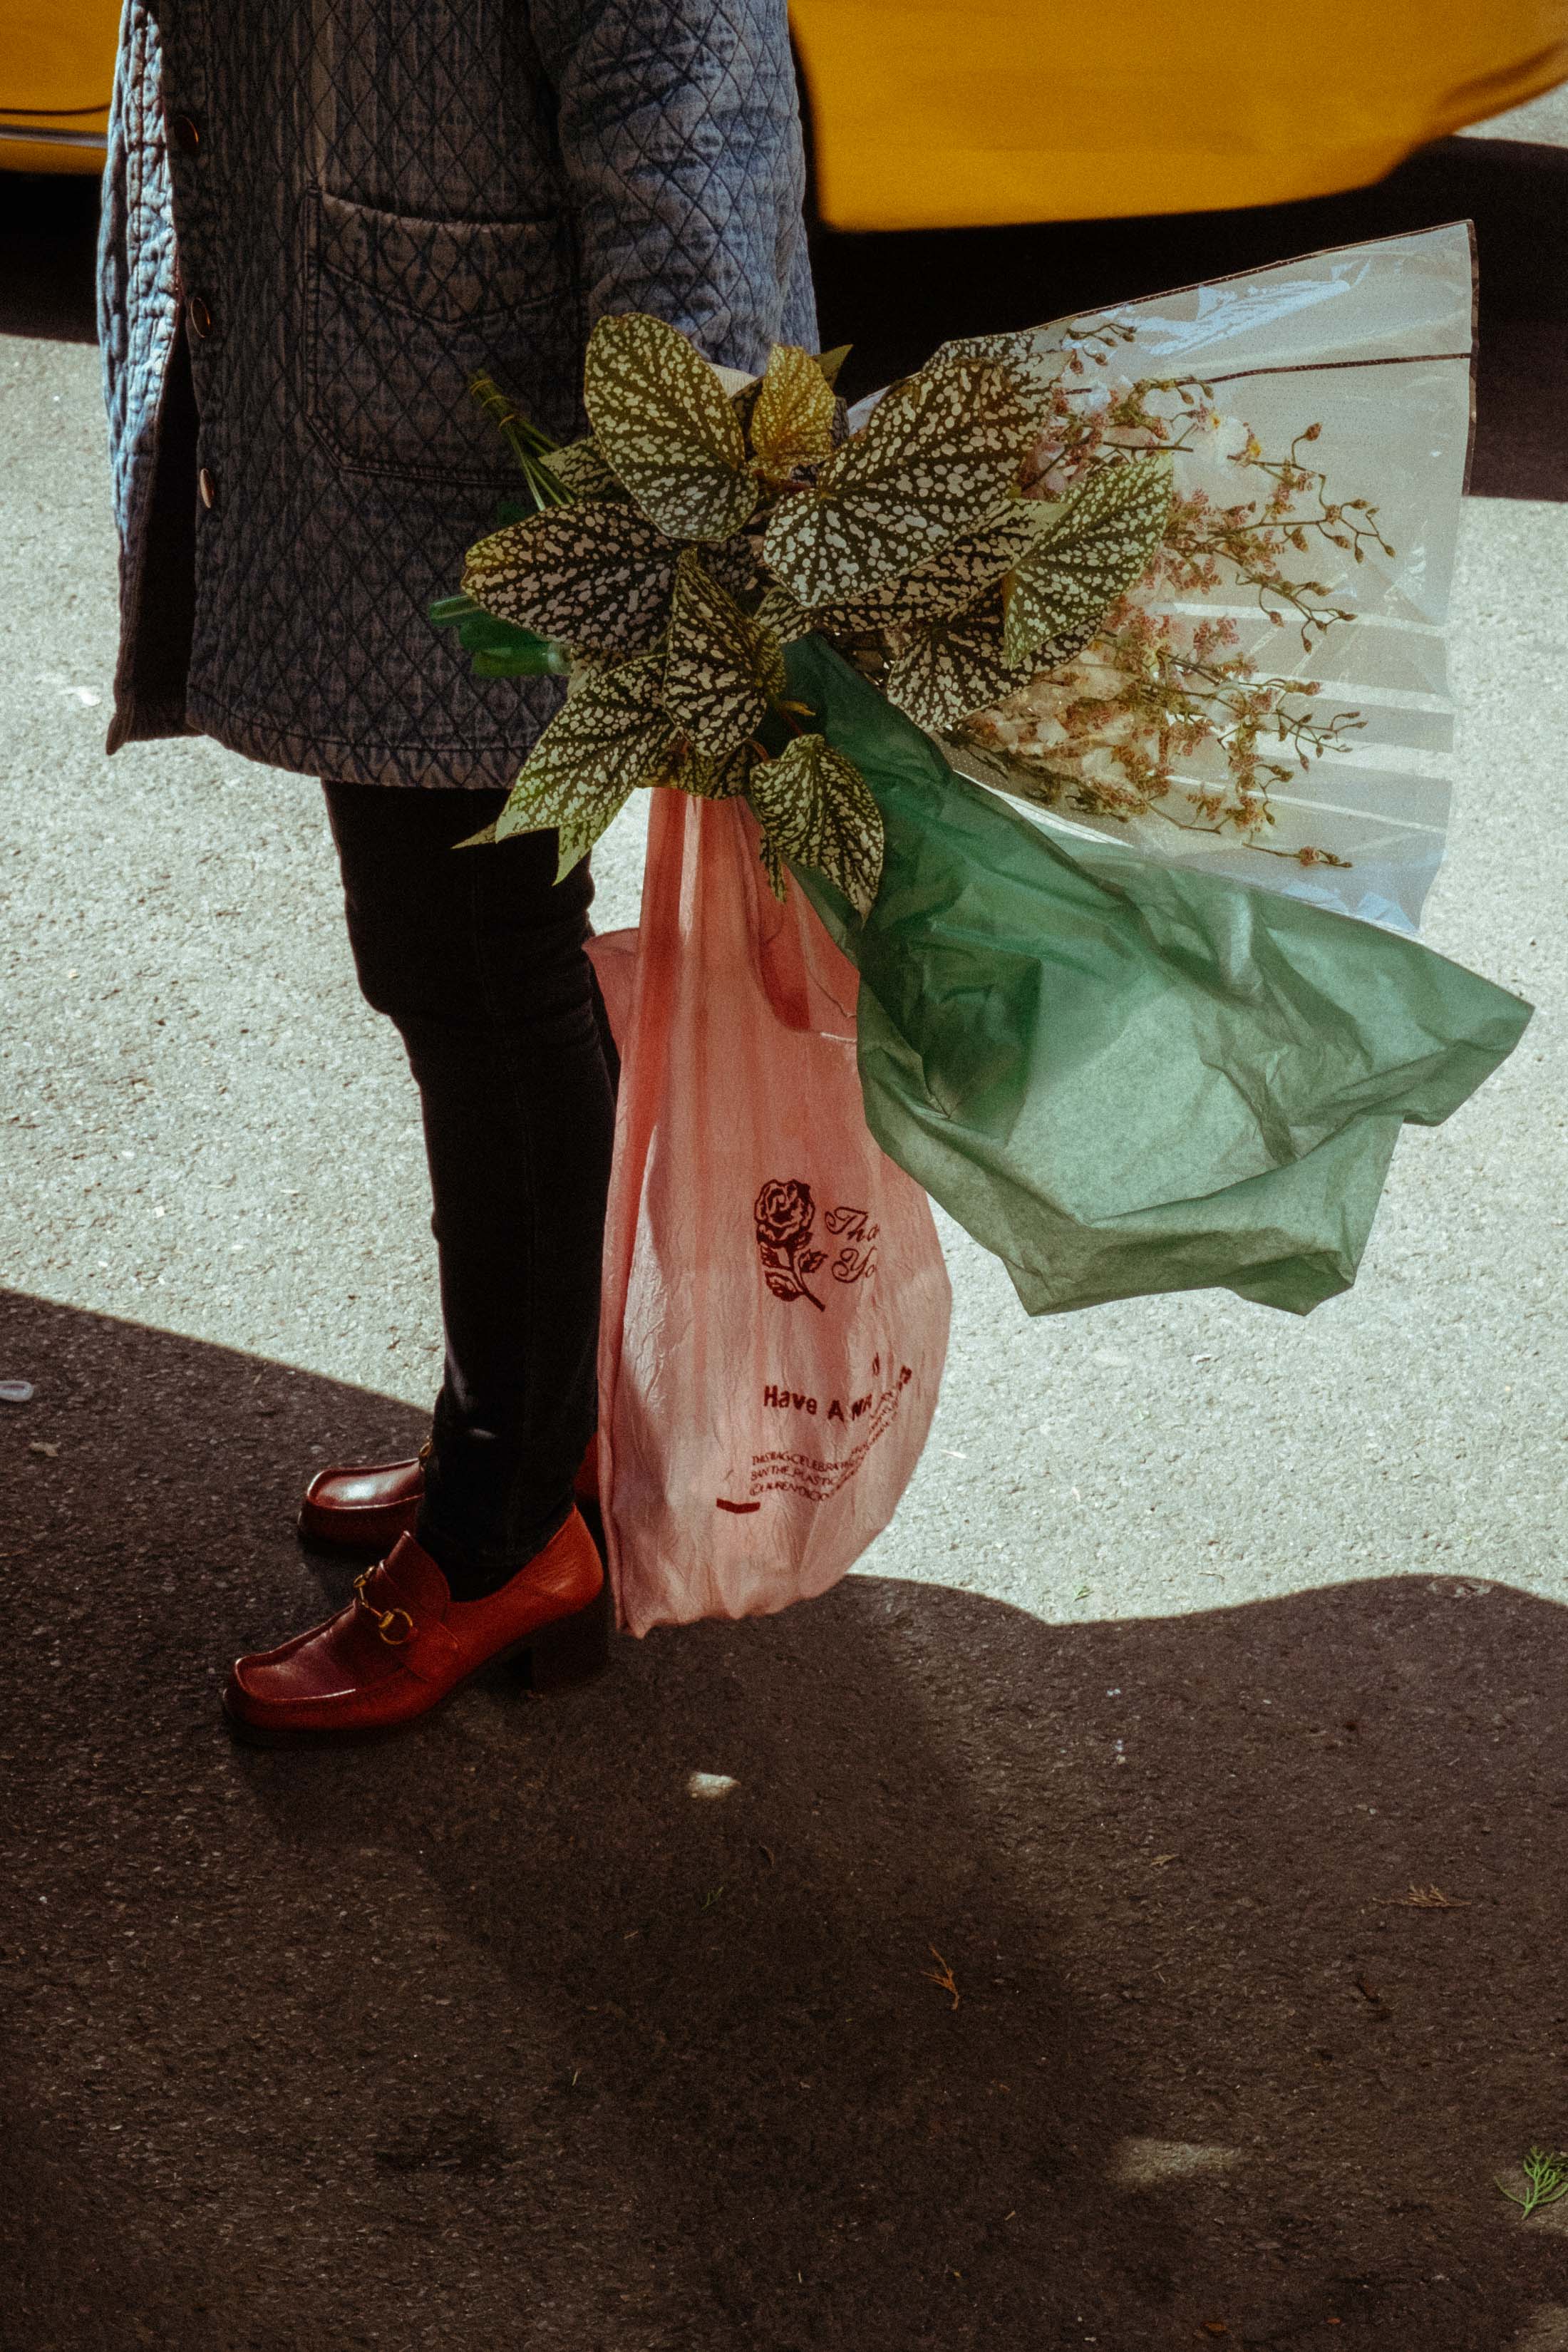 Florist Brittany Asch shops for flowers on 28th street in New York